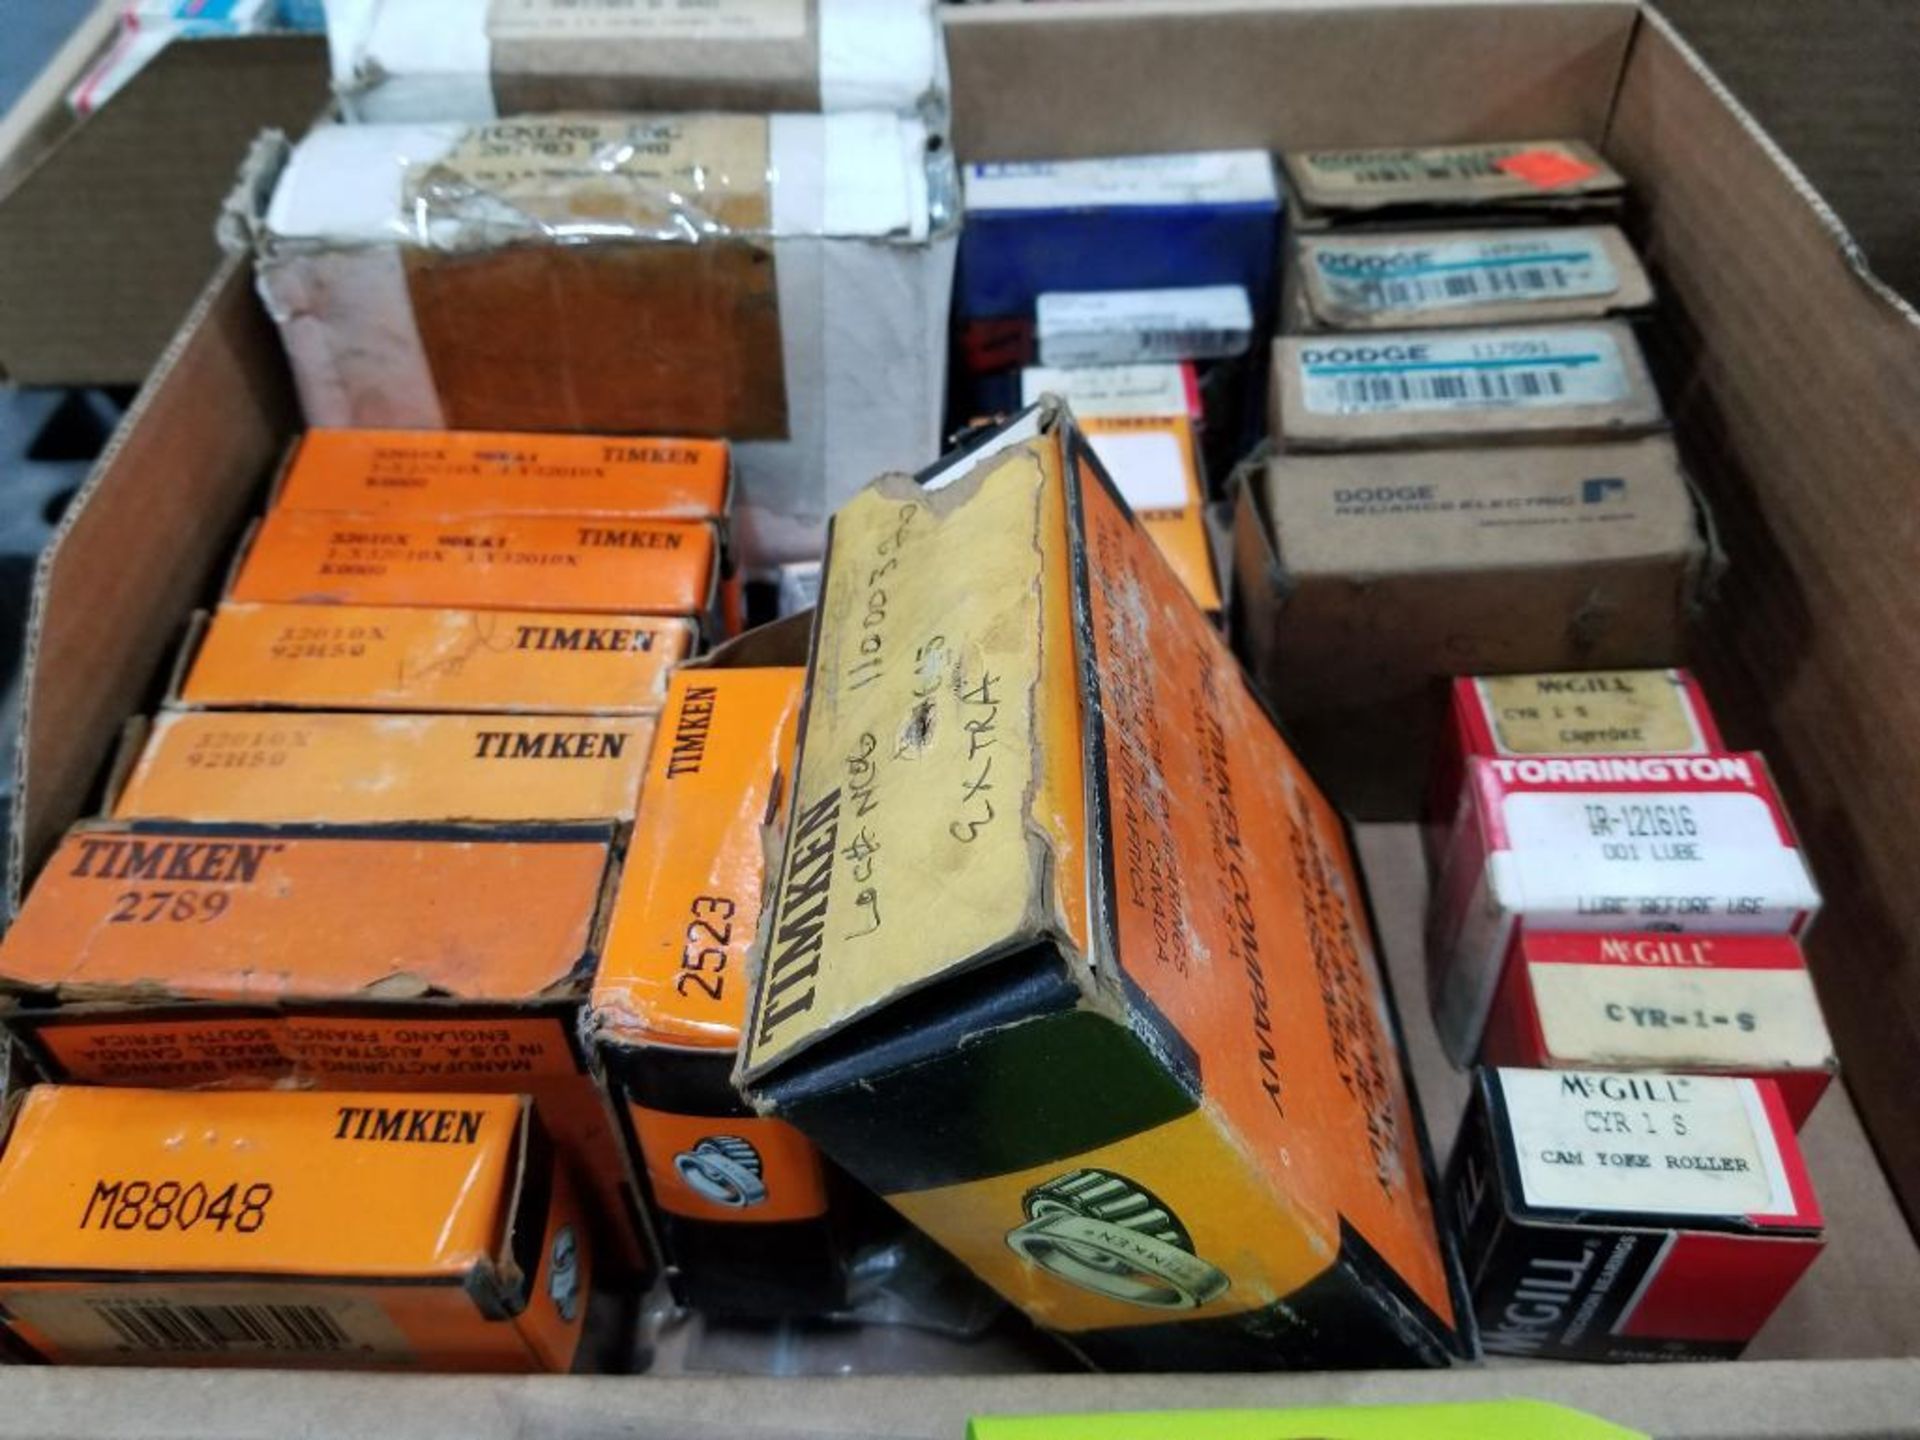 Large assortment of Timken, McGill, and other bearings, etc.